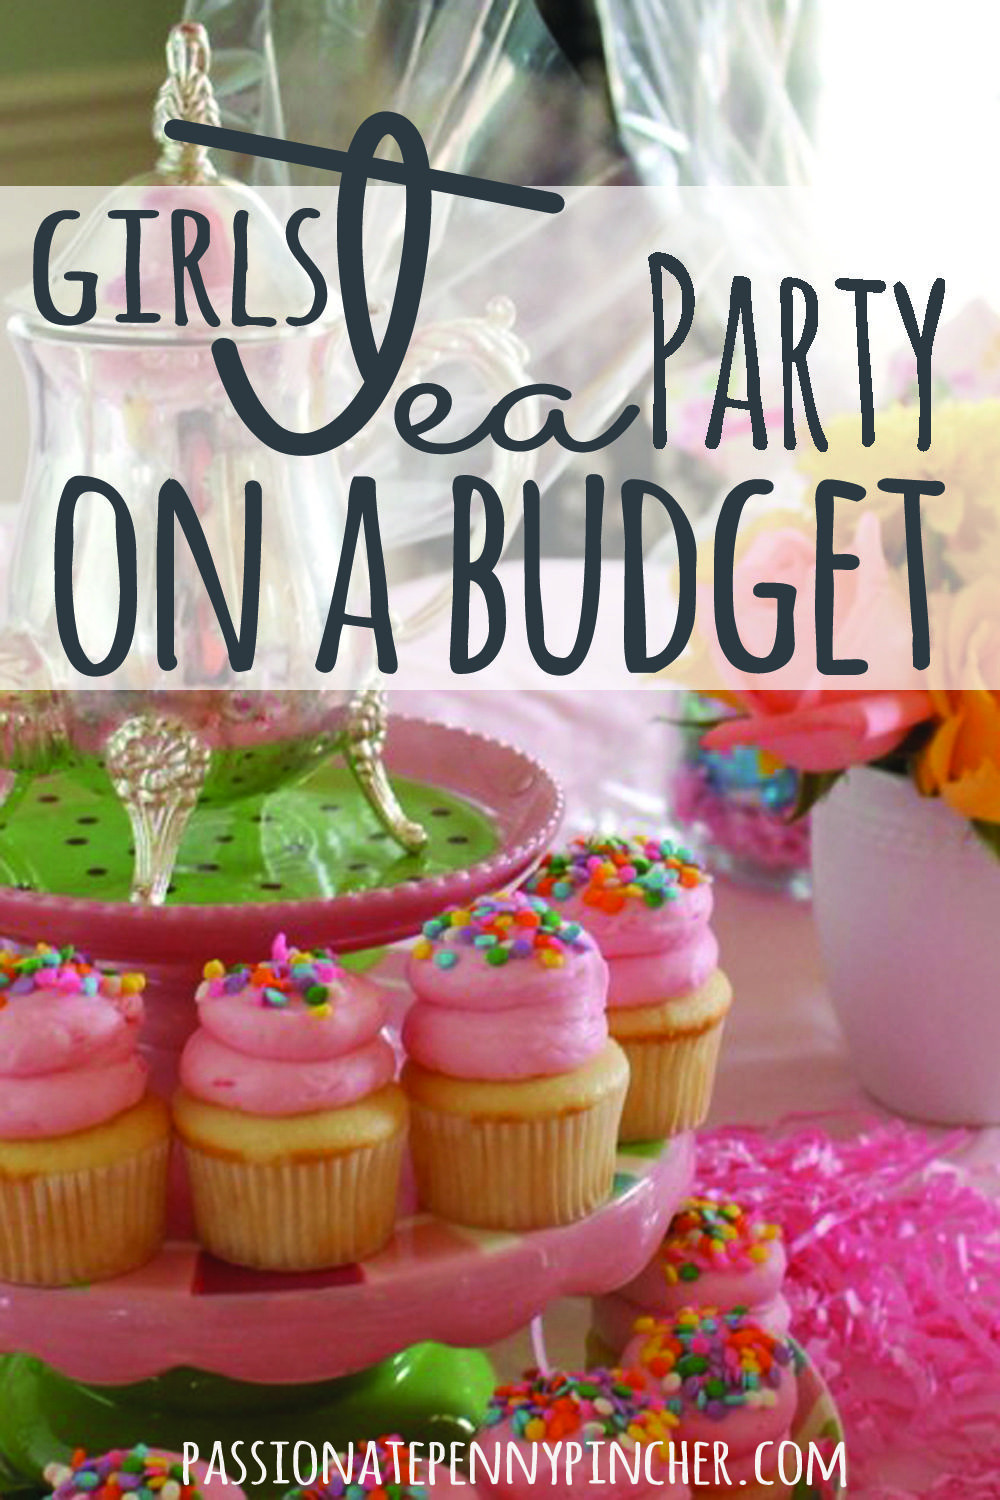 Party Games For Little Kids
 Girls Tea Party A Bud